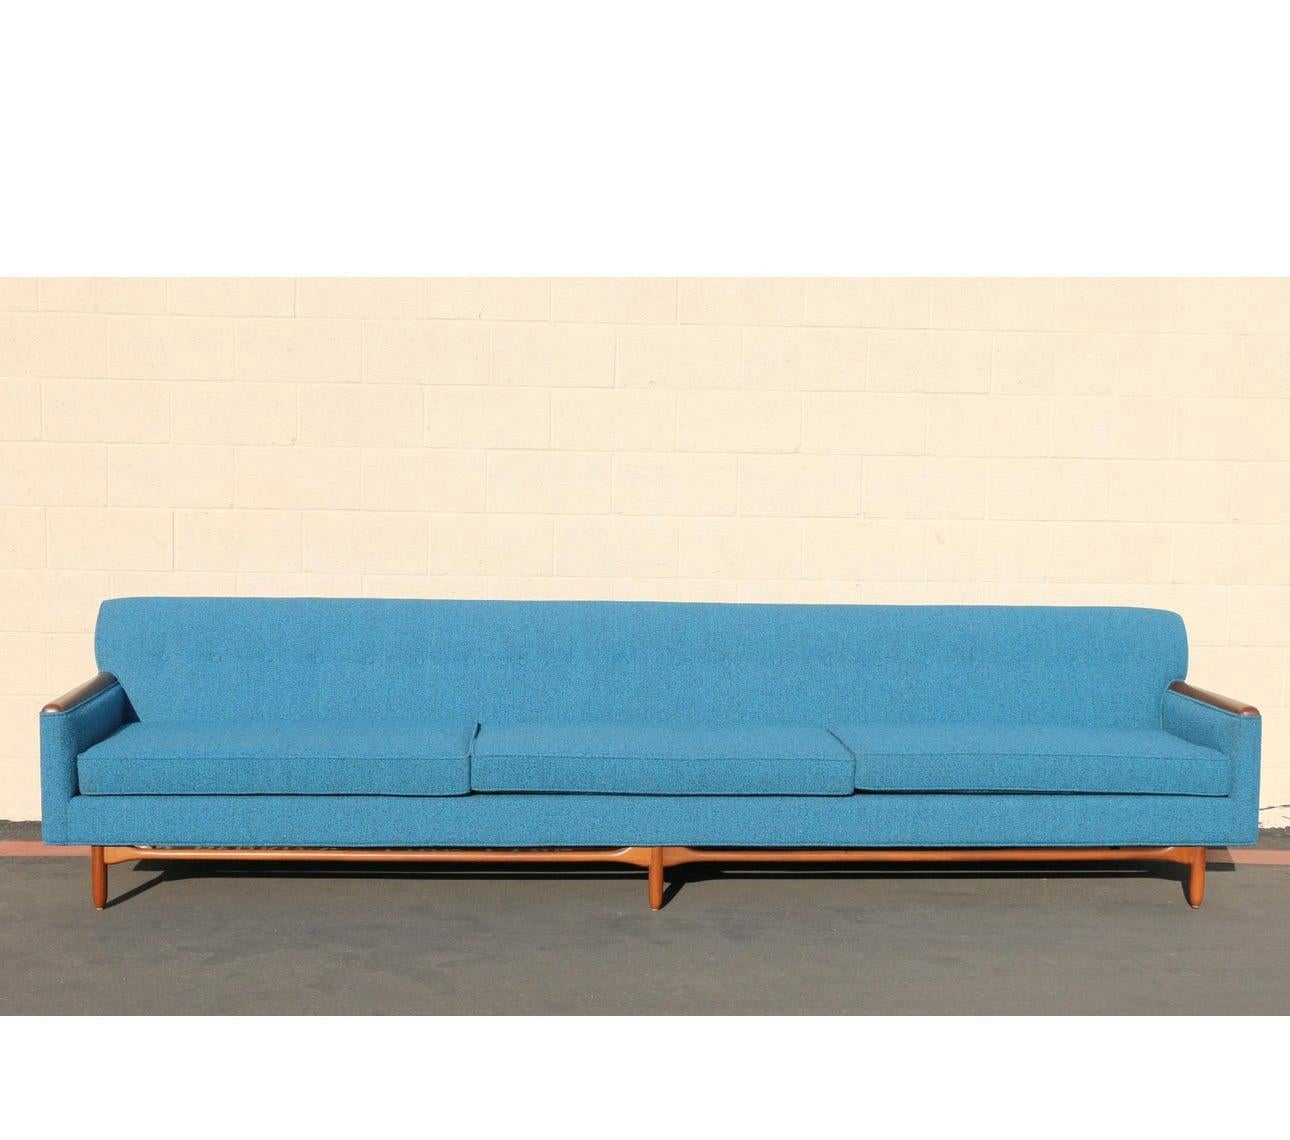 Wonderful Mid-Century three seats sofa from the 1960s. This sofa is in excellent condition. It has been restored, (refinished and reupholstered). The fabric it is absolutely clean and the base of the sofa it is made of walnut wood. The buttons are